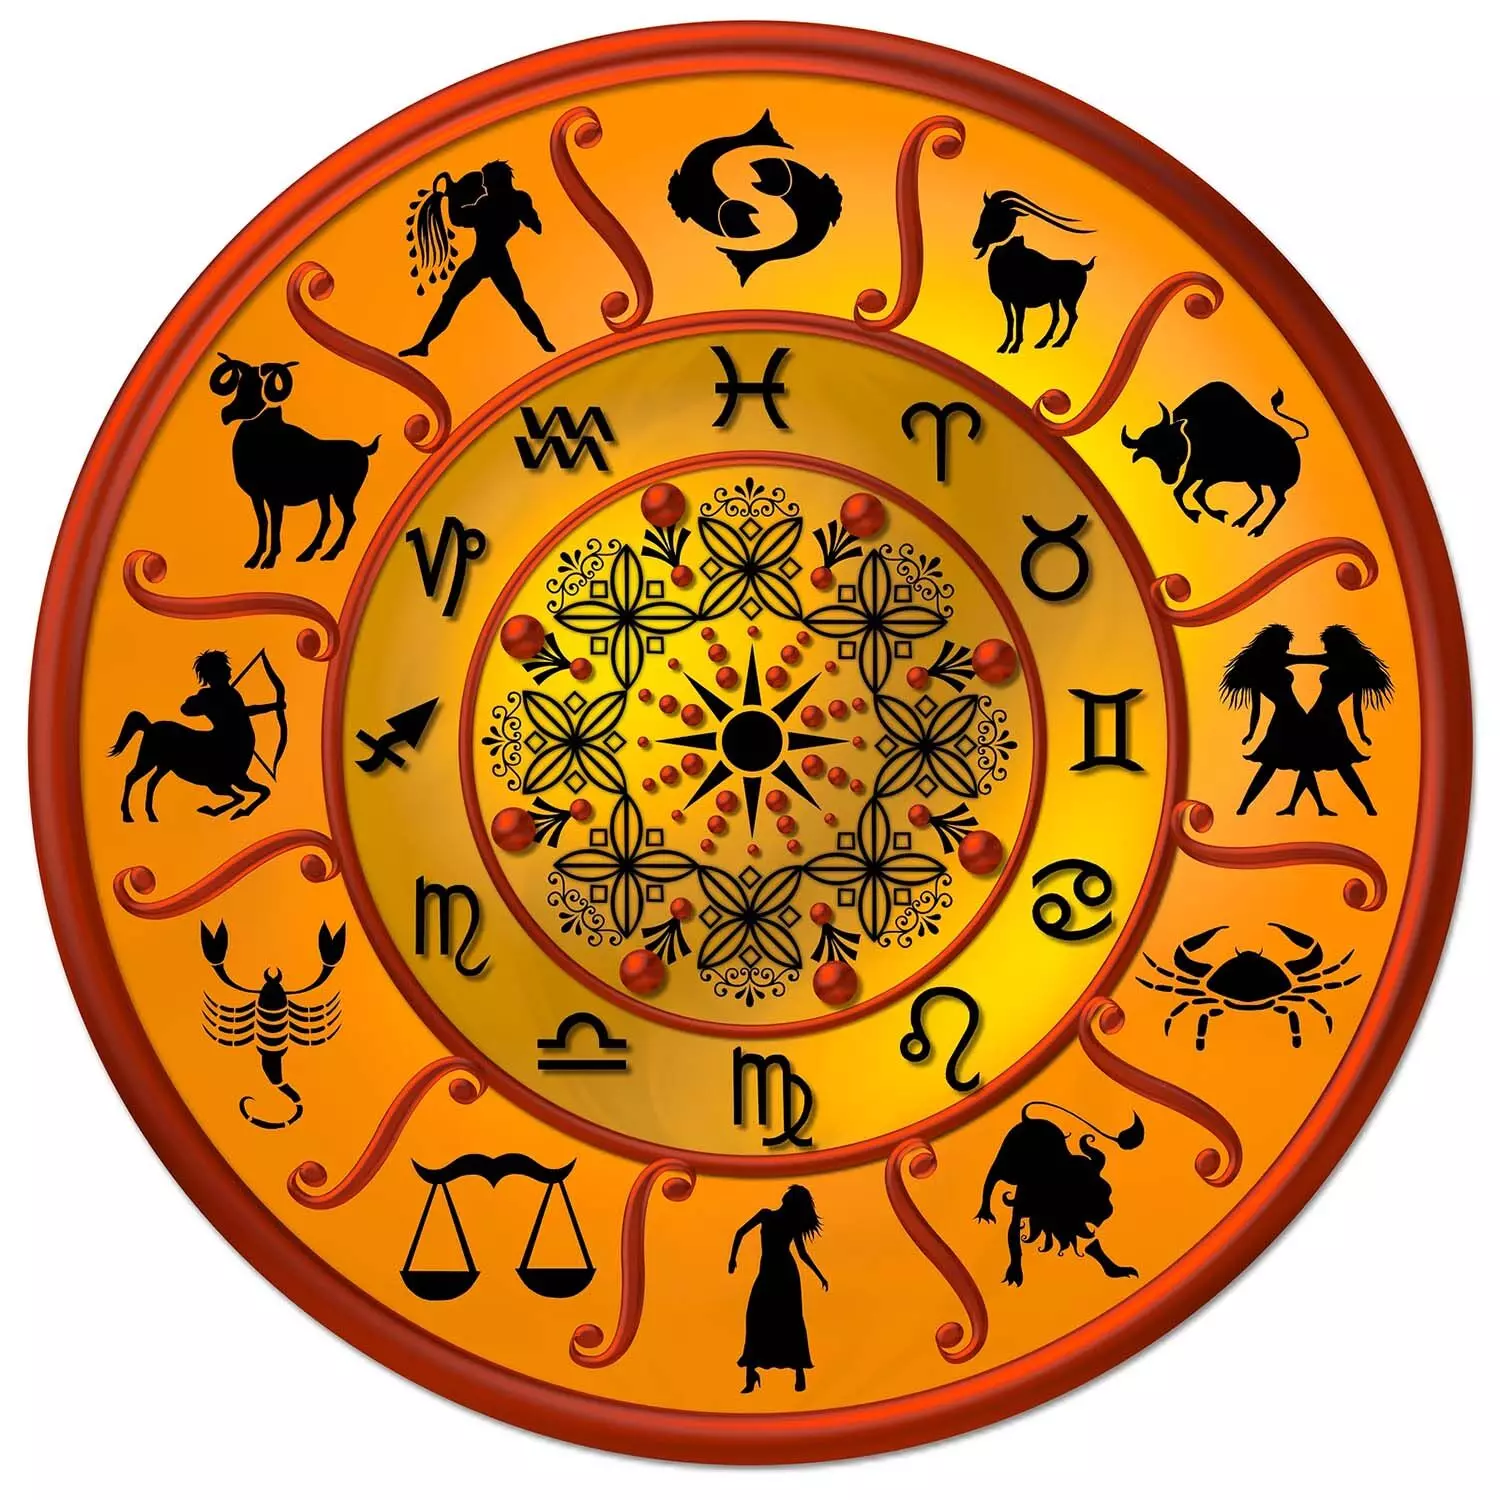 15 July – Know your todays horoscope